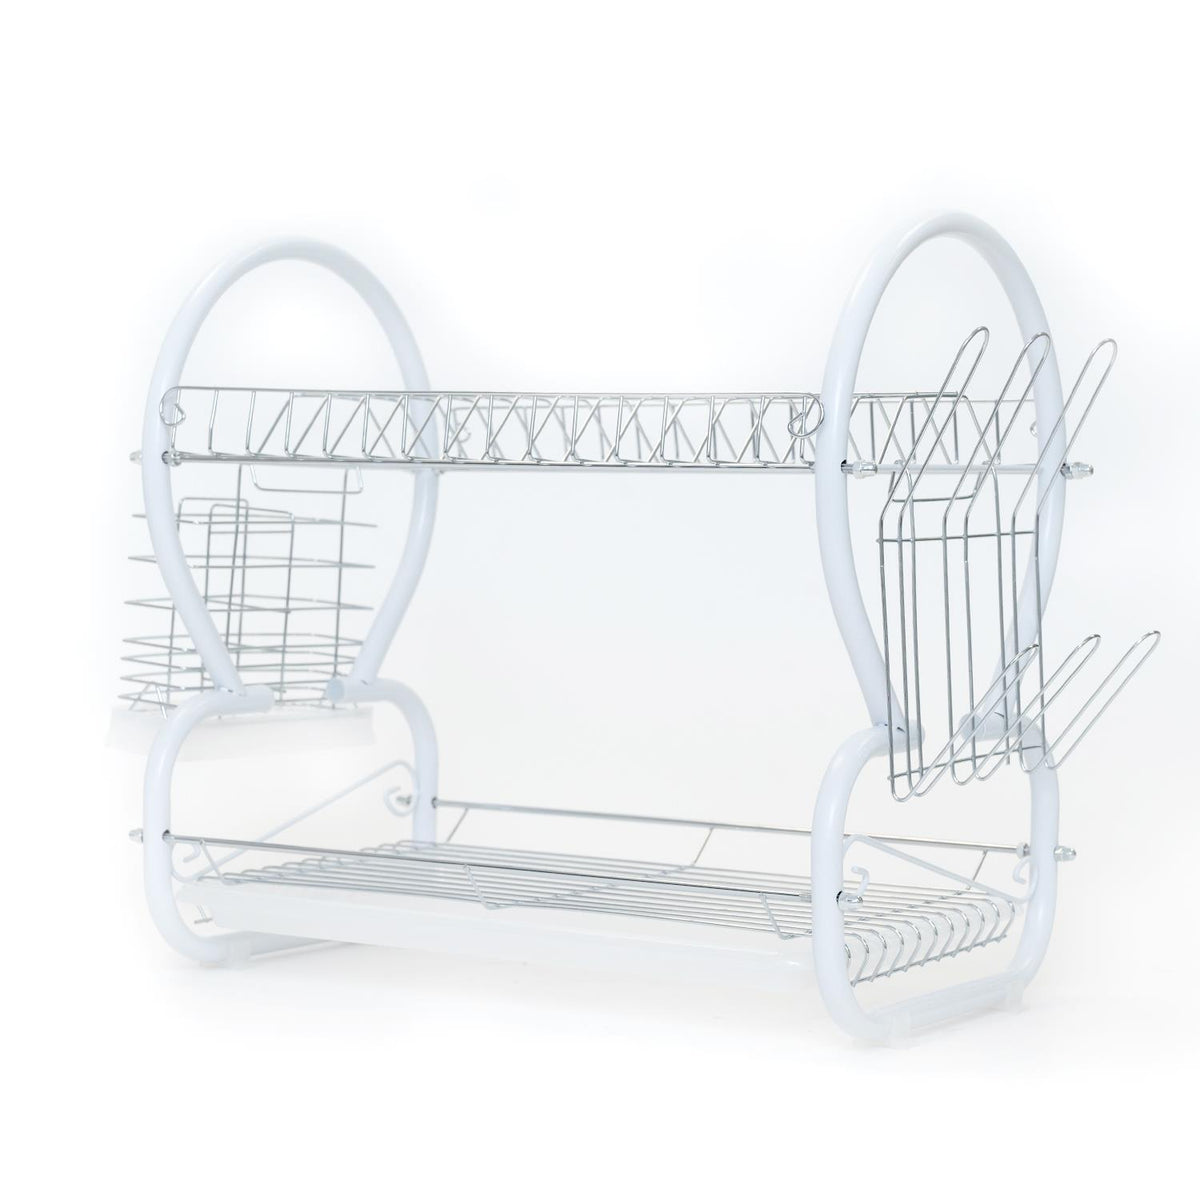 Two-Tier White Dish Drainer Rack With Utensils Holder